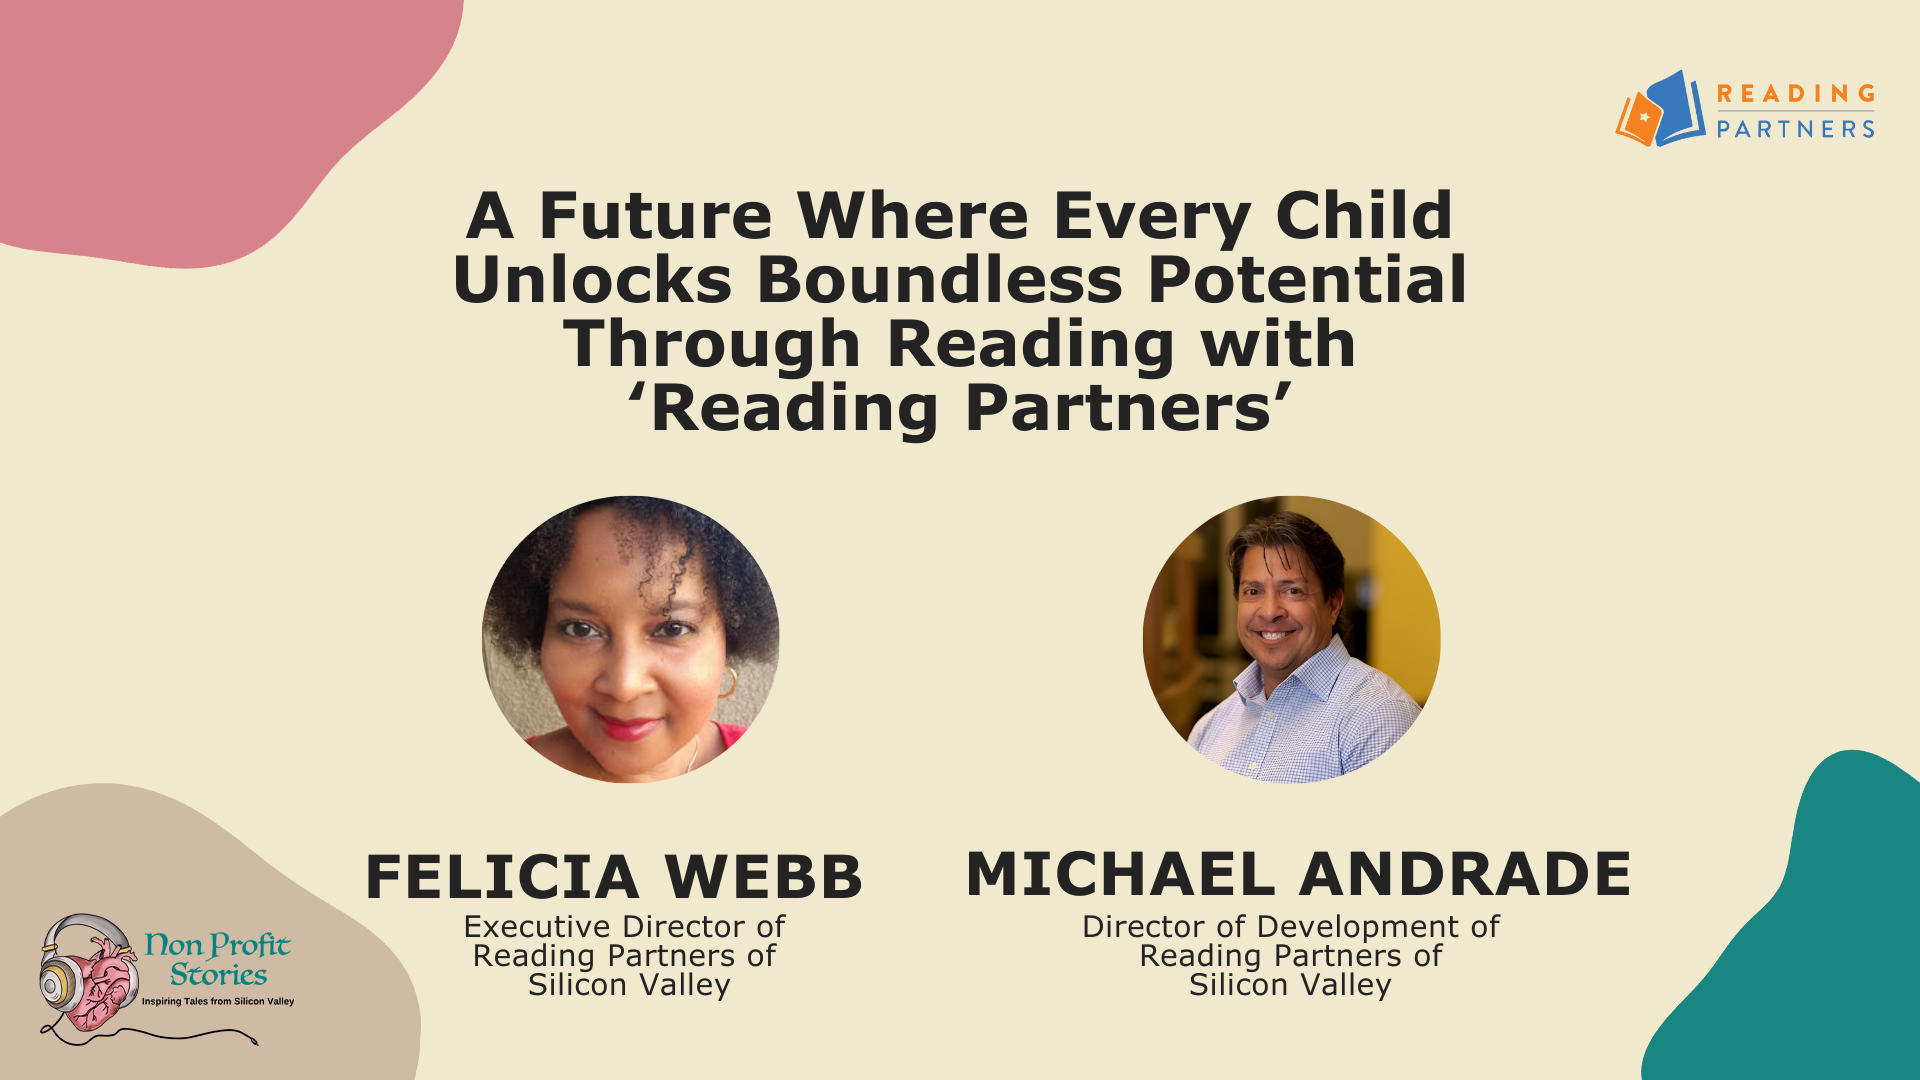 A Future Where Every Child Unlocks Boundless Potential Through Reading with ‘Reading Partners’